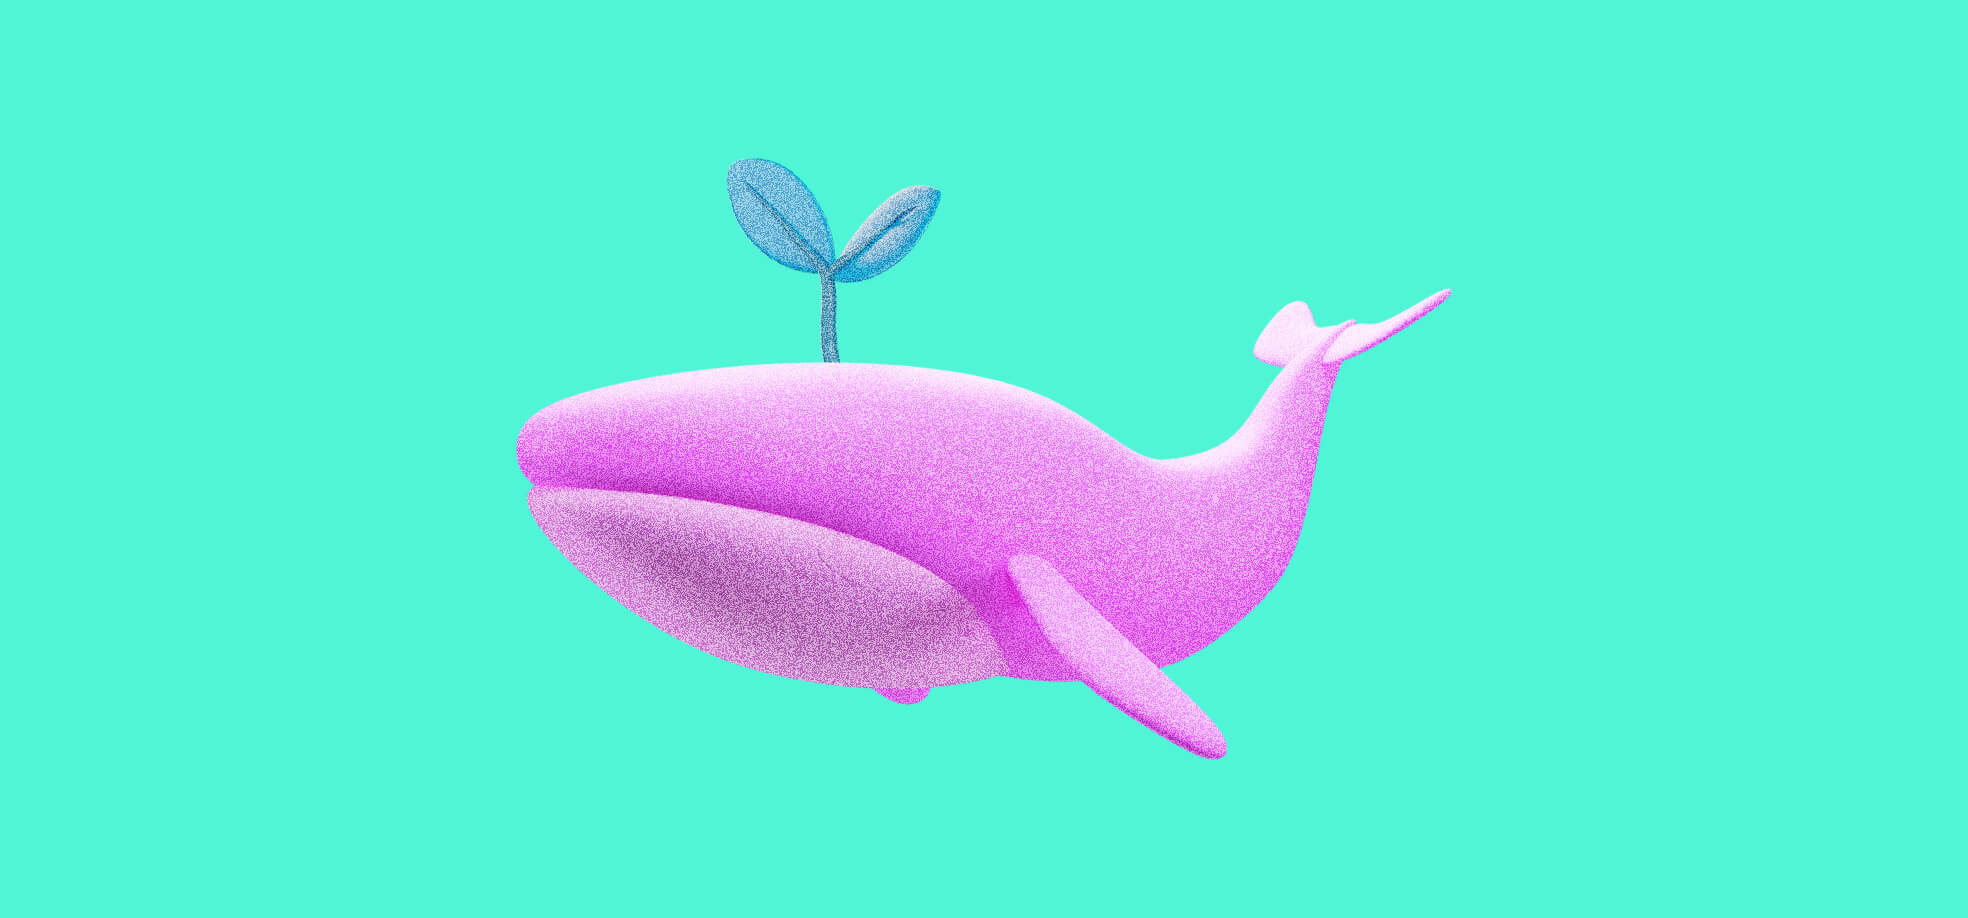 illustration of a sprout growing on a whale